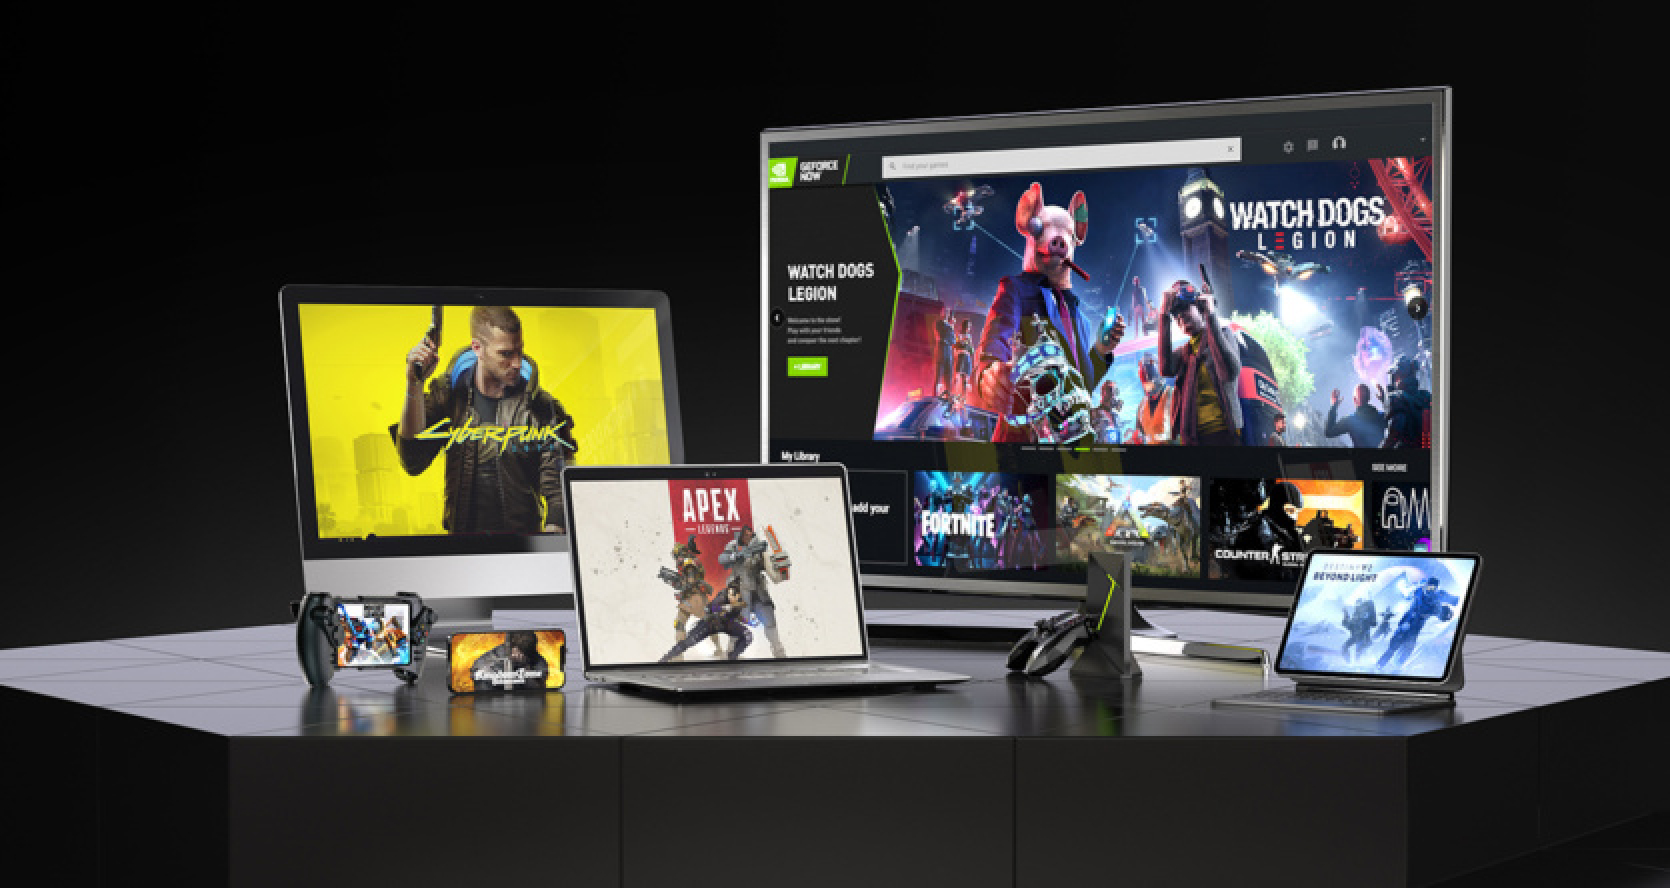 Nvidia's free GeForce Now plan will show ads (up to 2 minutes) while games load